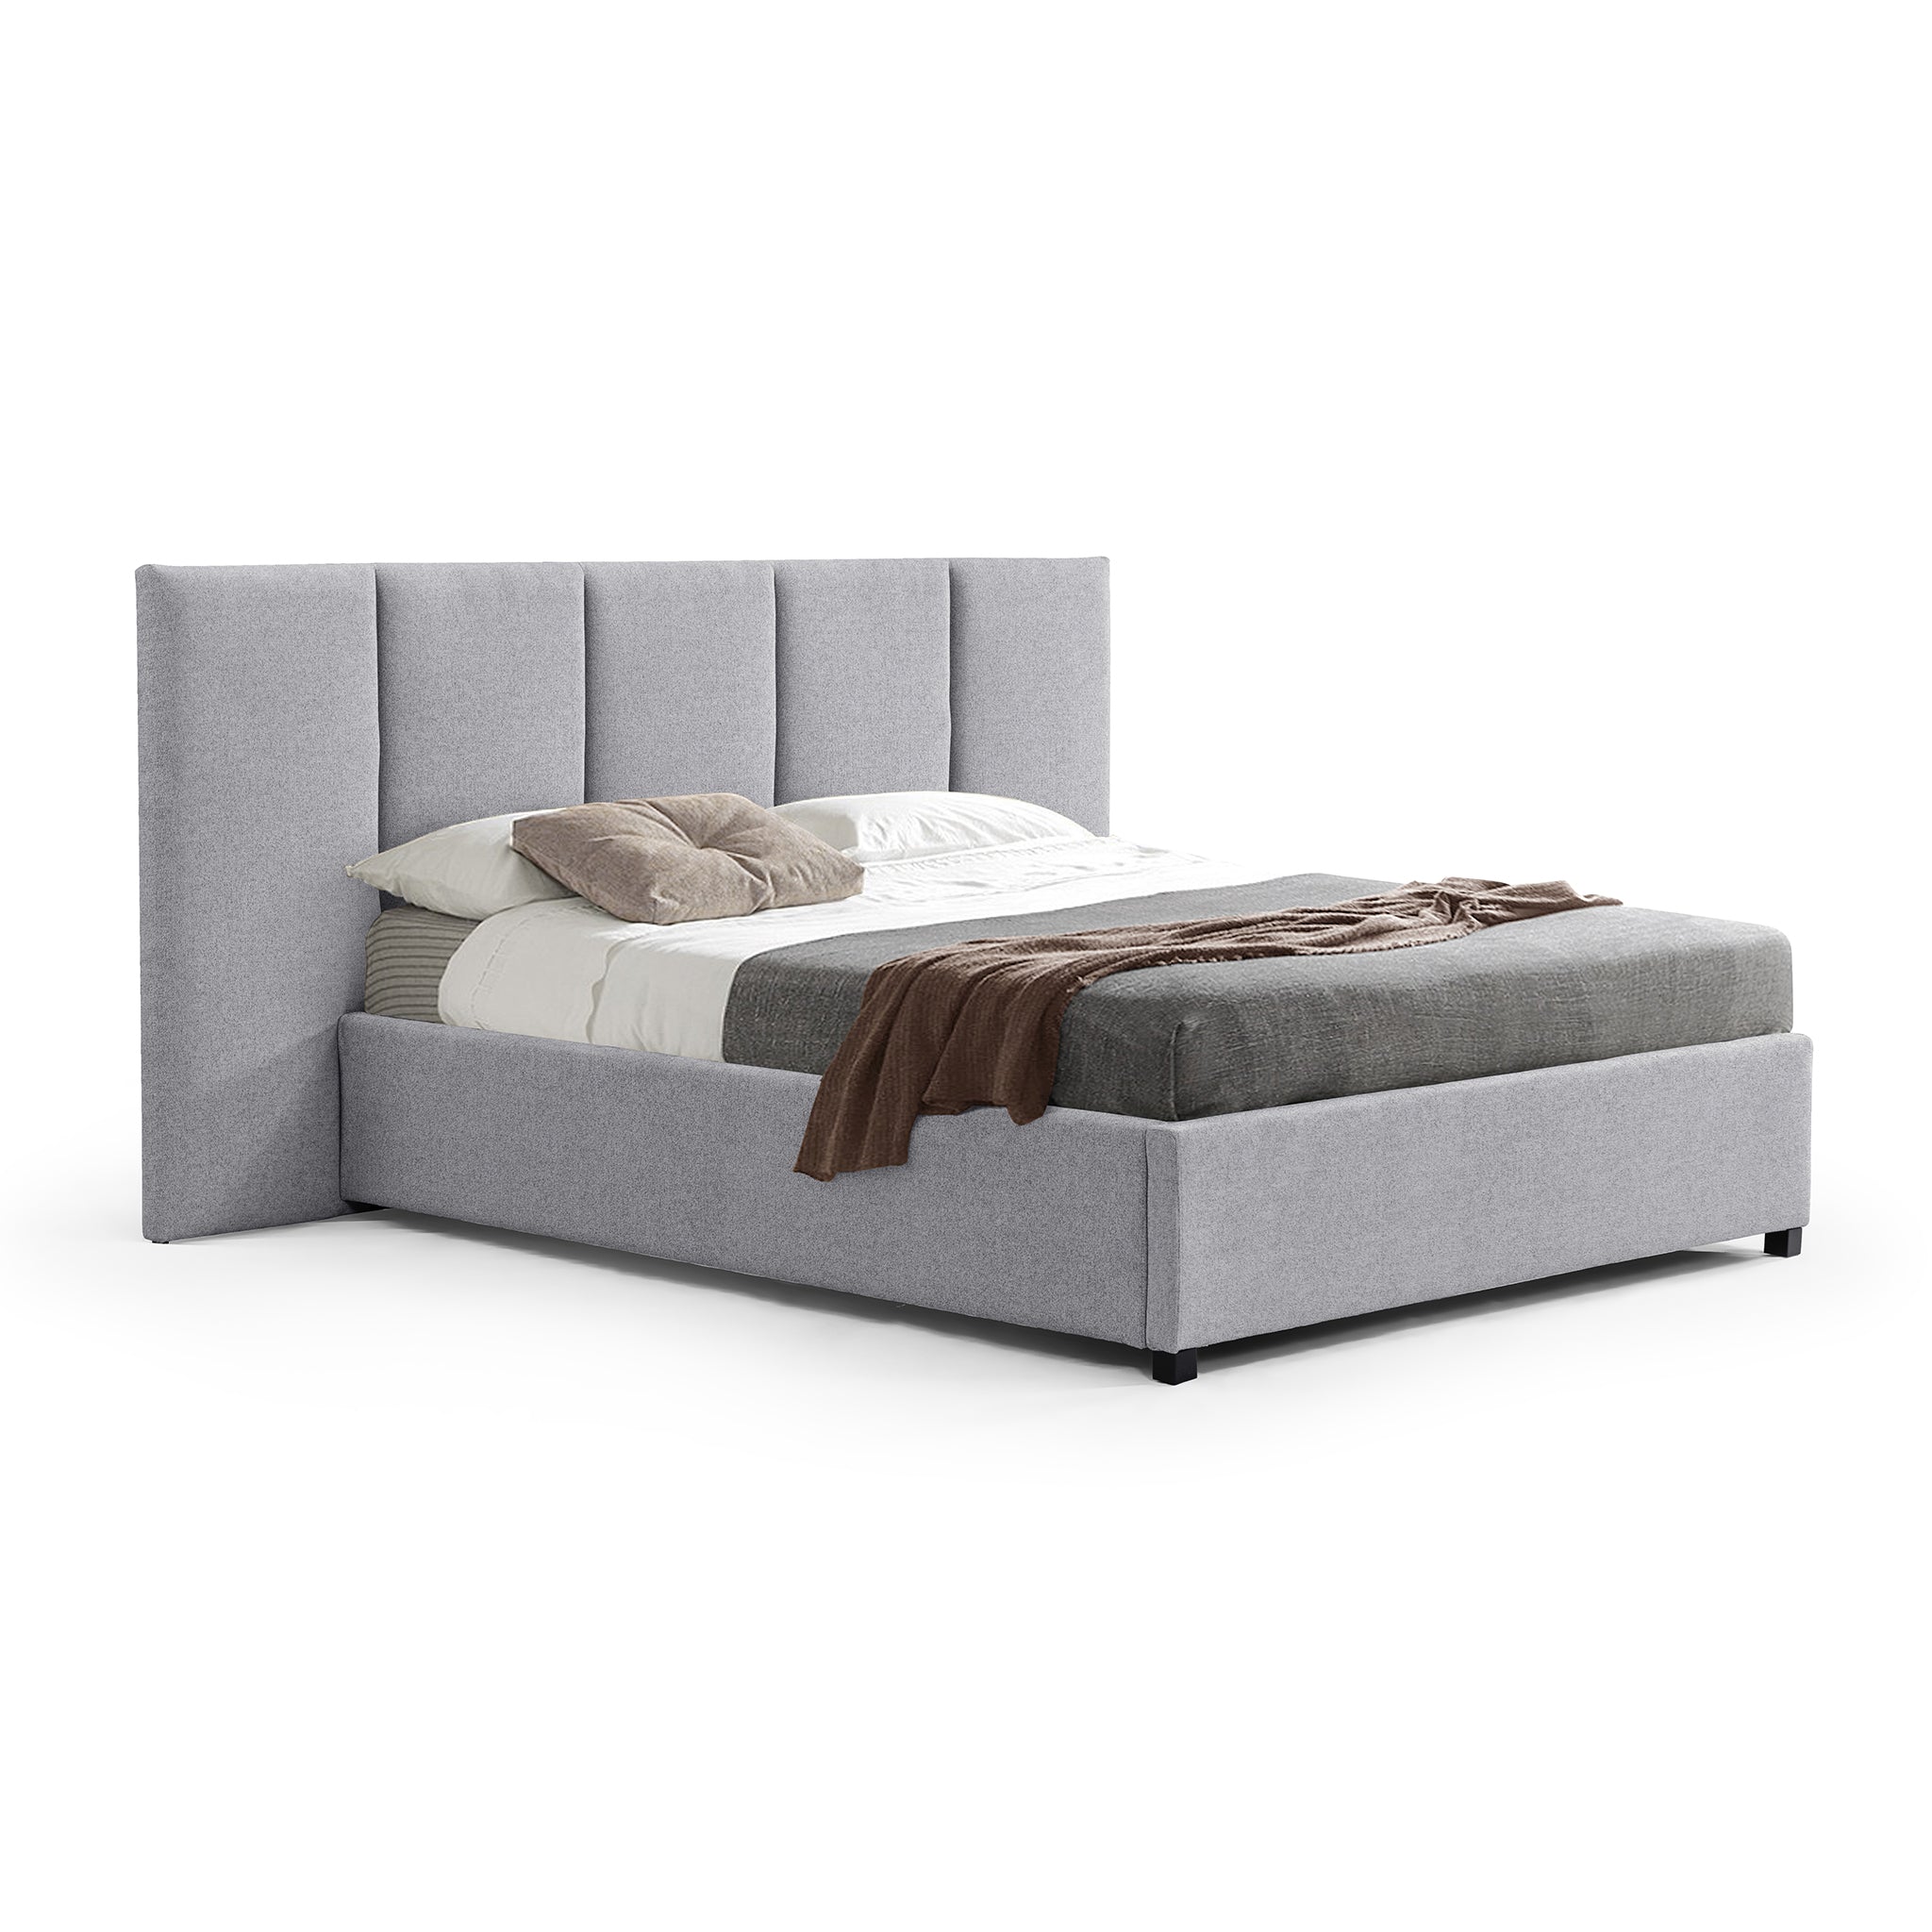 Amado Queen Sized Bed Frame - Spec Grey